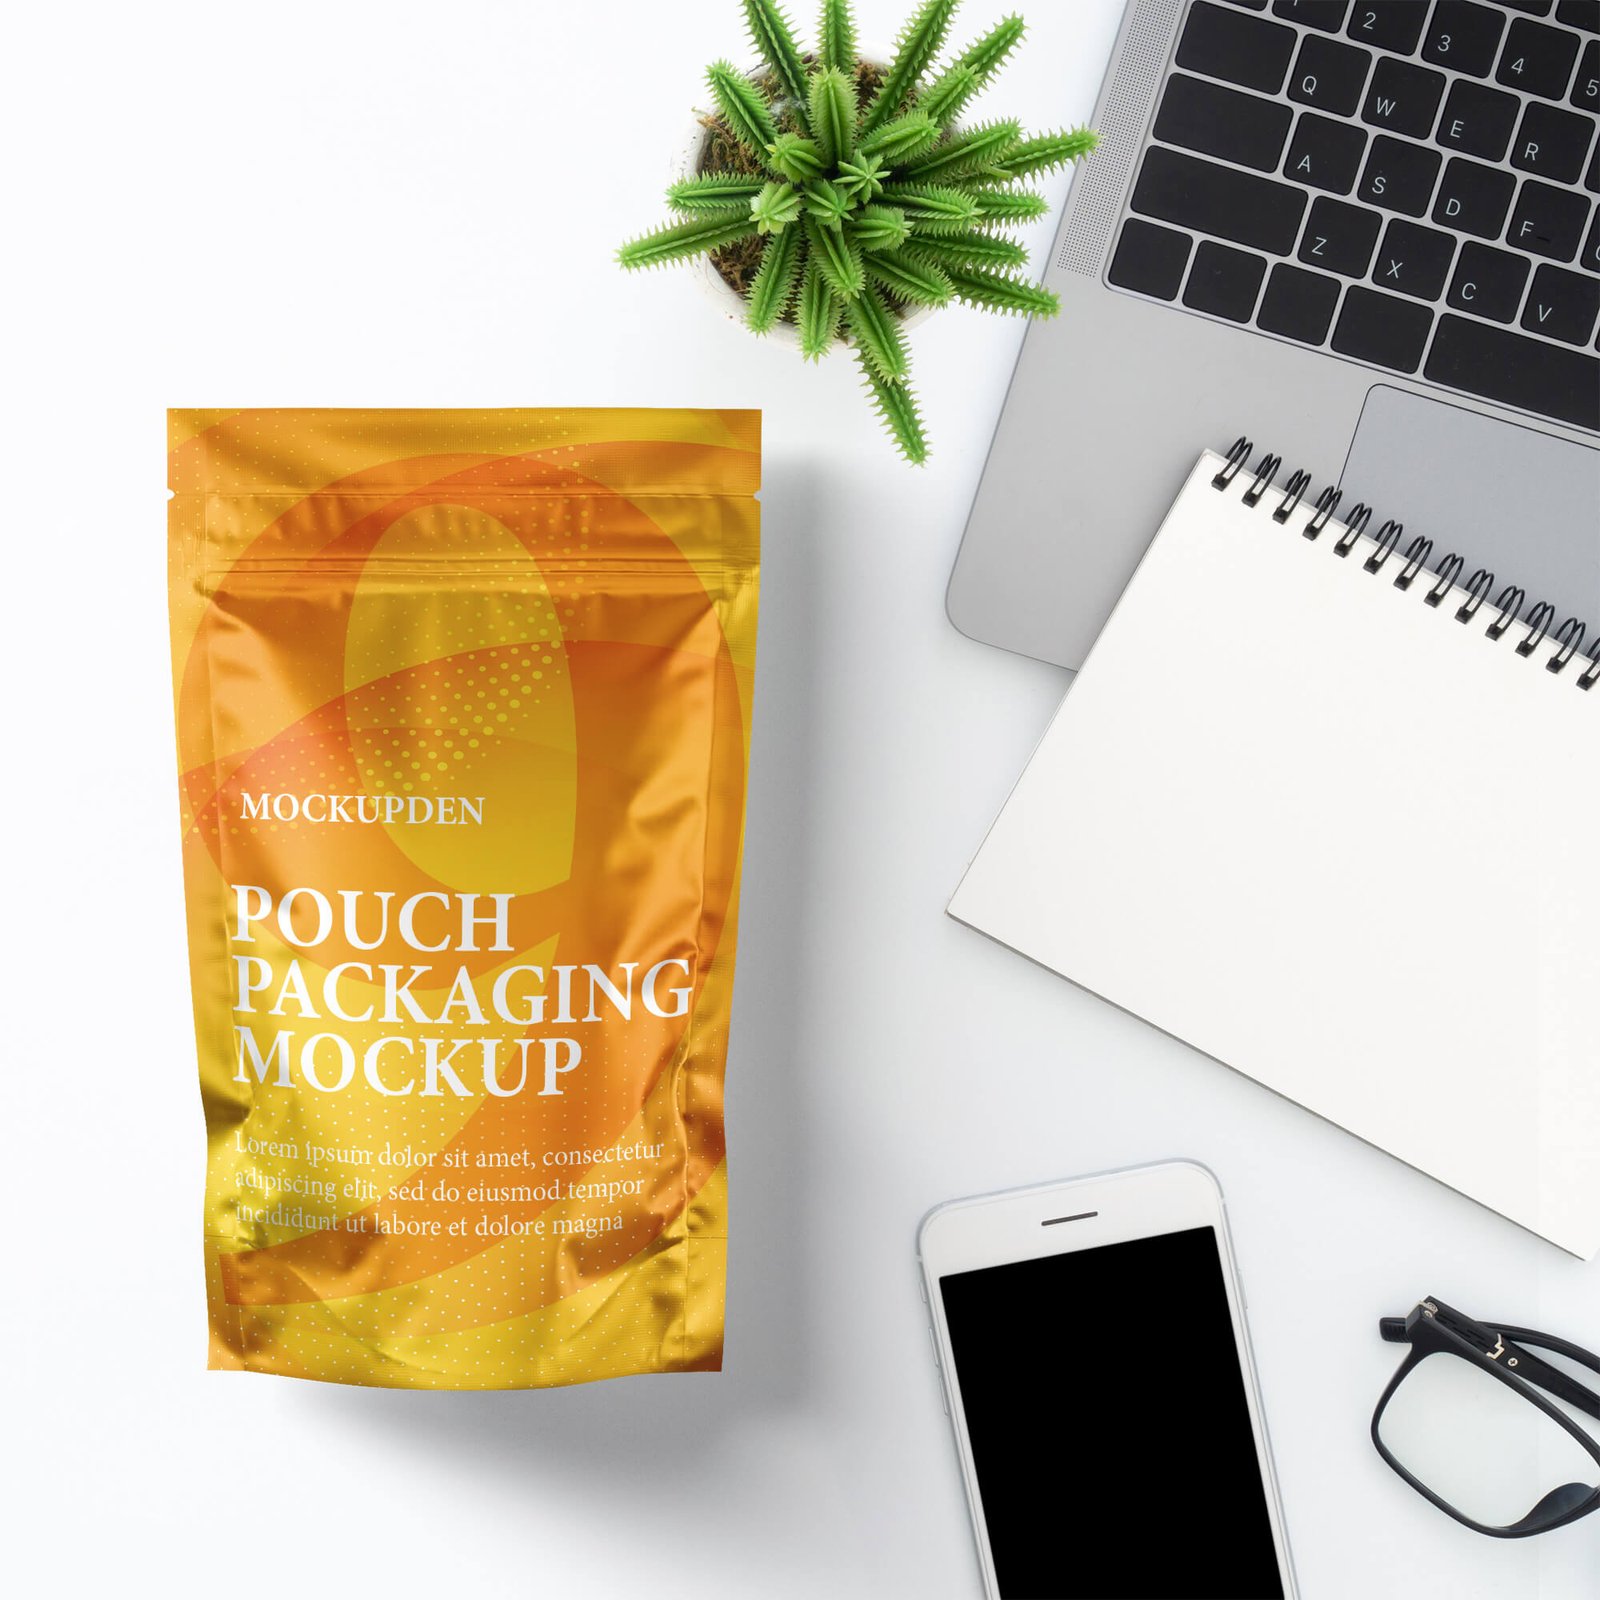 Free Pouch Packaging Mockup PSD Template